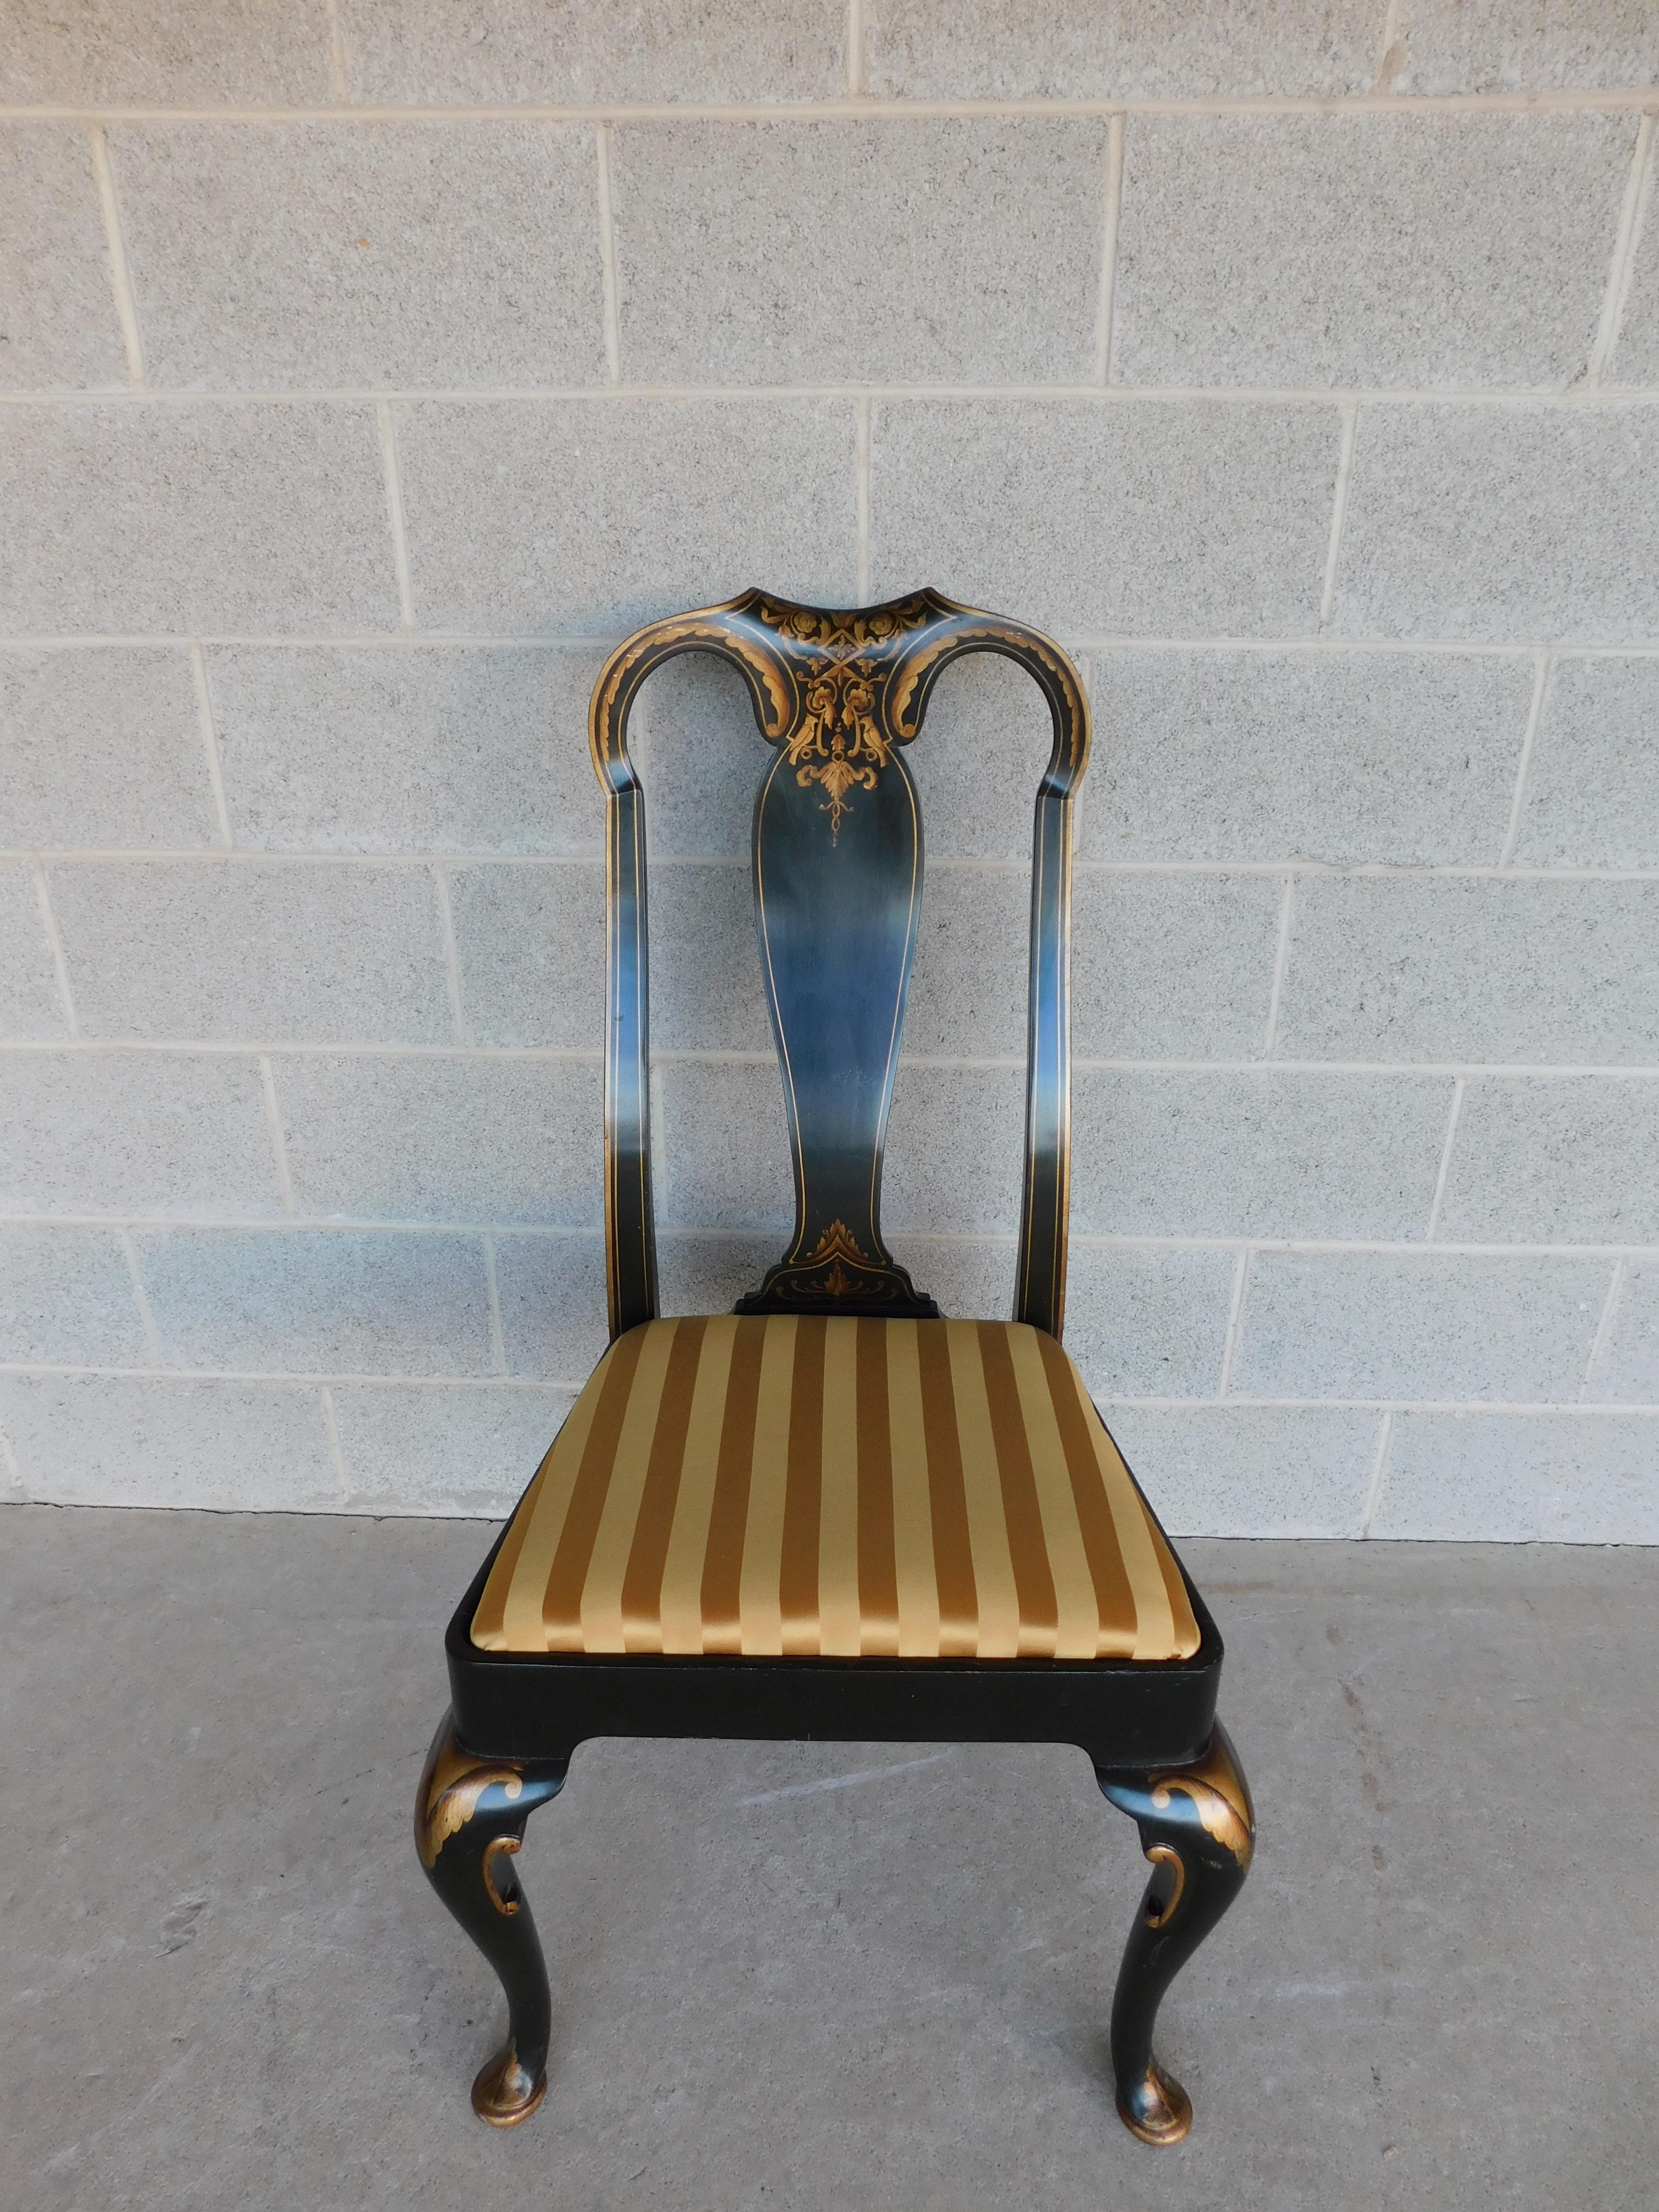 Features fine quality construction, Gilt Gold Ornate Painted Flower and Bird Motif, Dark Green Primary Color, Striped Gold Seat Upholstery.
Approx 30 years old.

Good Vintage Condition, See photos - Normal Wear associated with Antique and Vintage